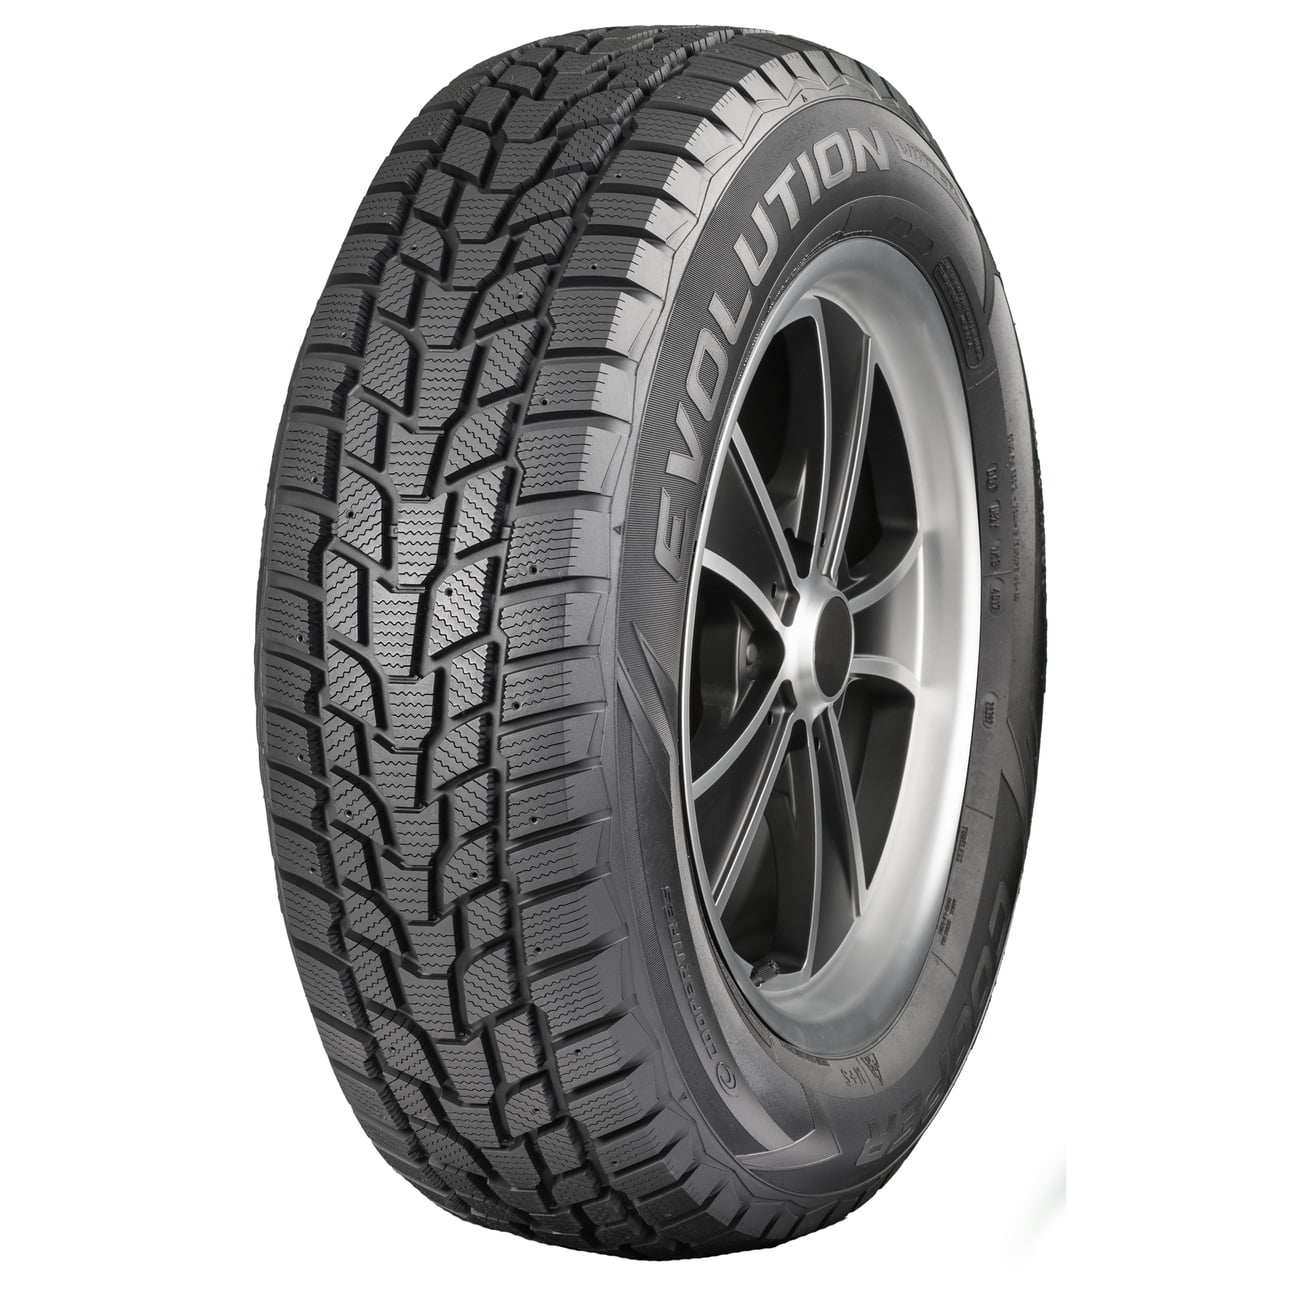 Uniroyal Tiger Paw Ice & Snow 235/65R17 104T Bsw Winter tire 